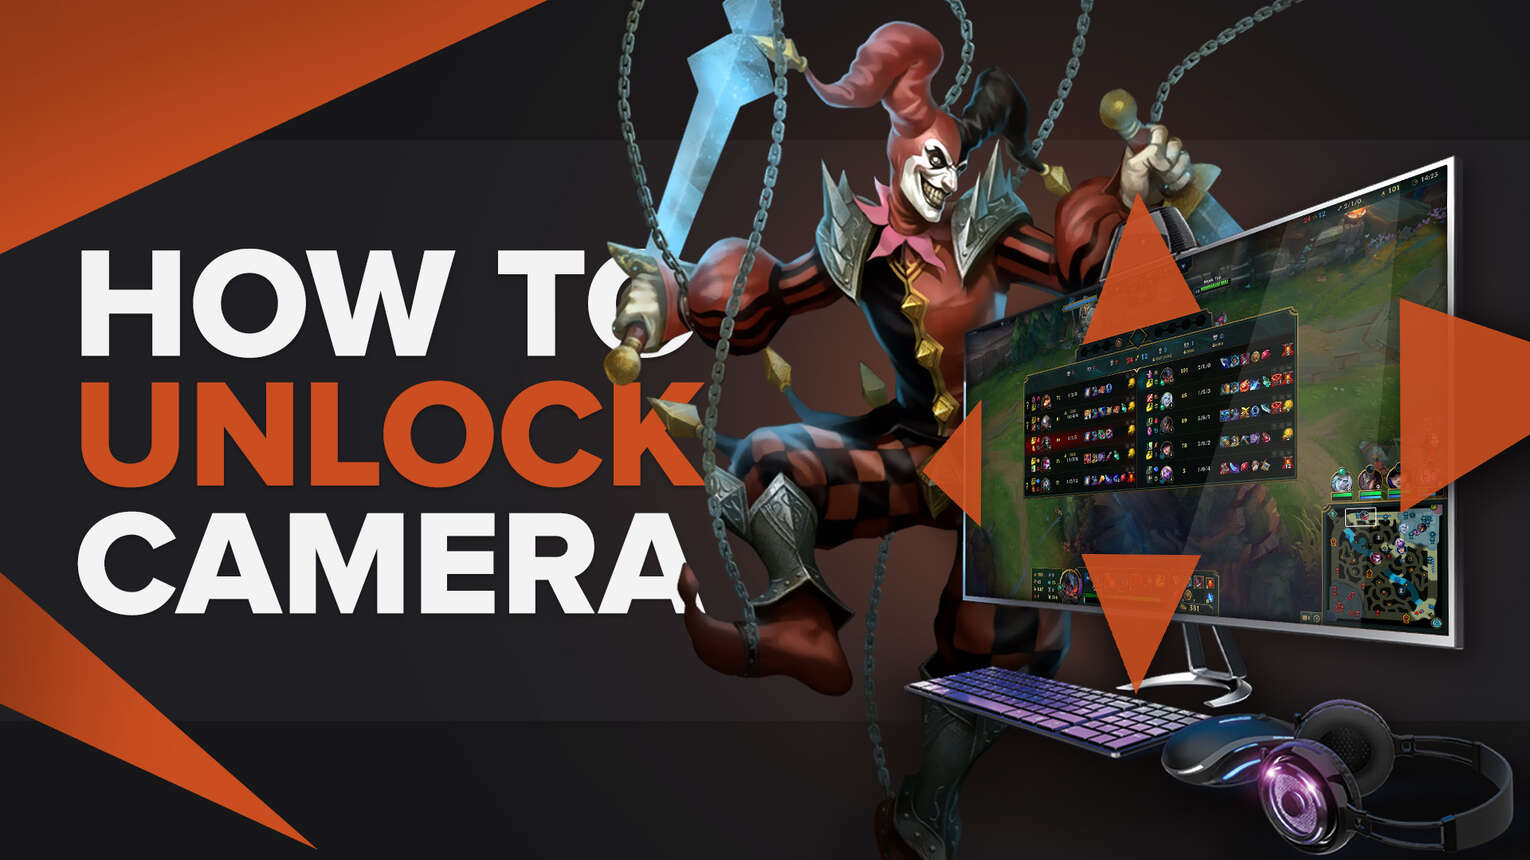 How to Unlock Camera in League of Legends [Step-by-Step]